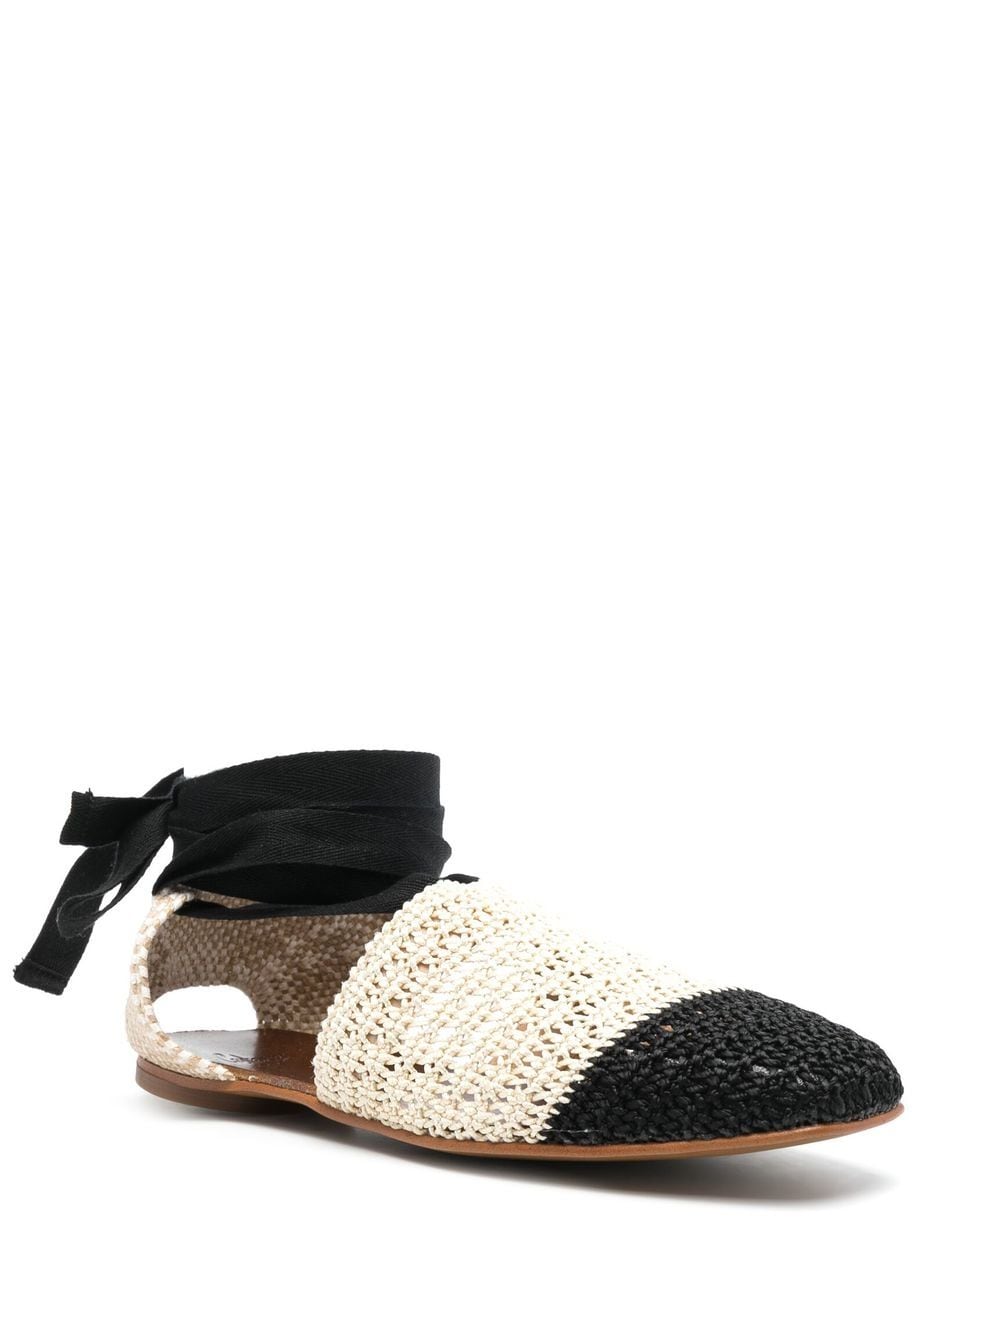 Image 2 of Castañer woven two-tone espadrille flats